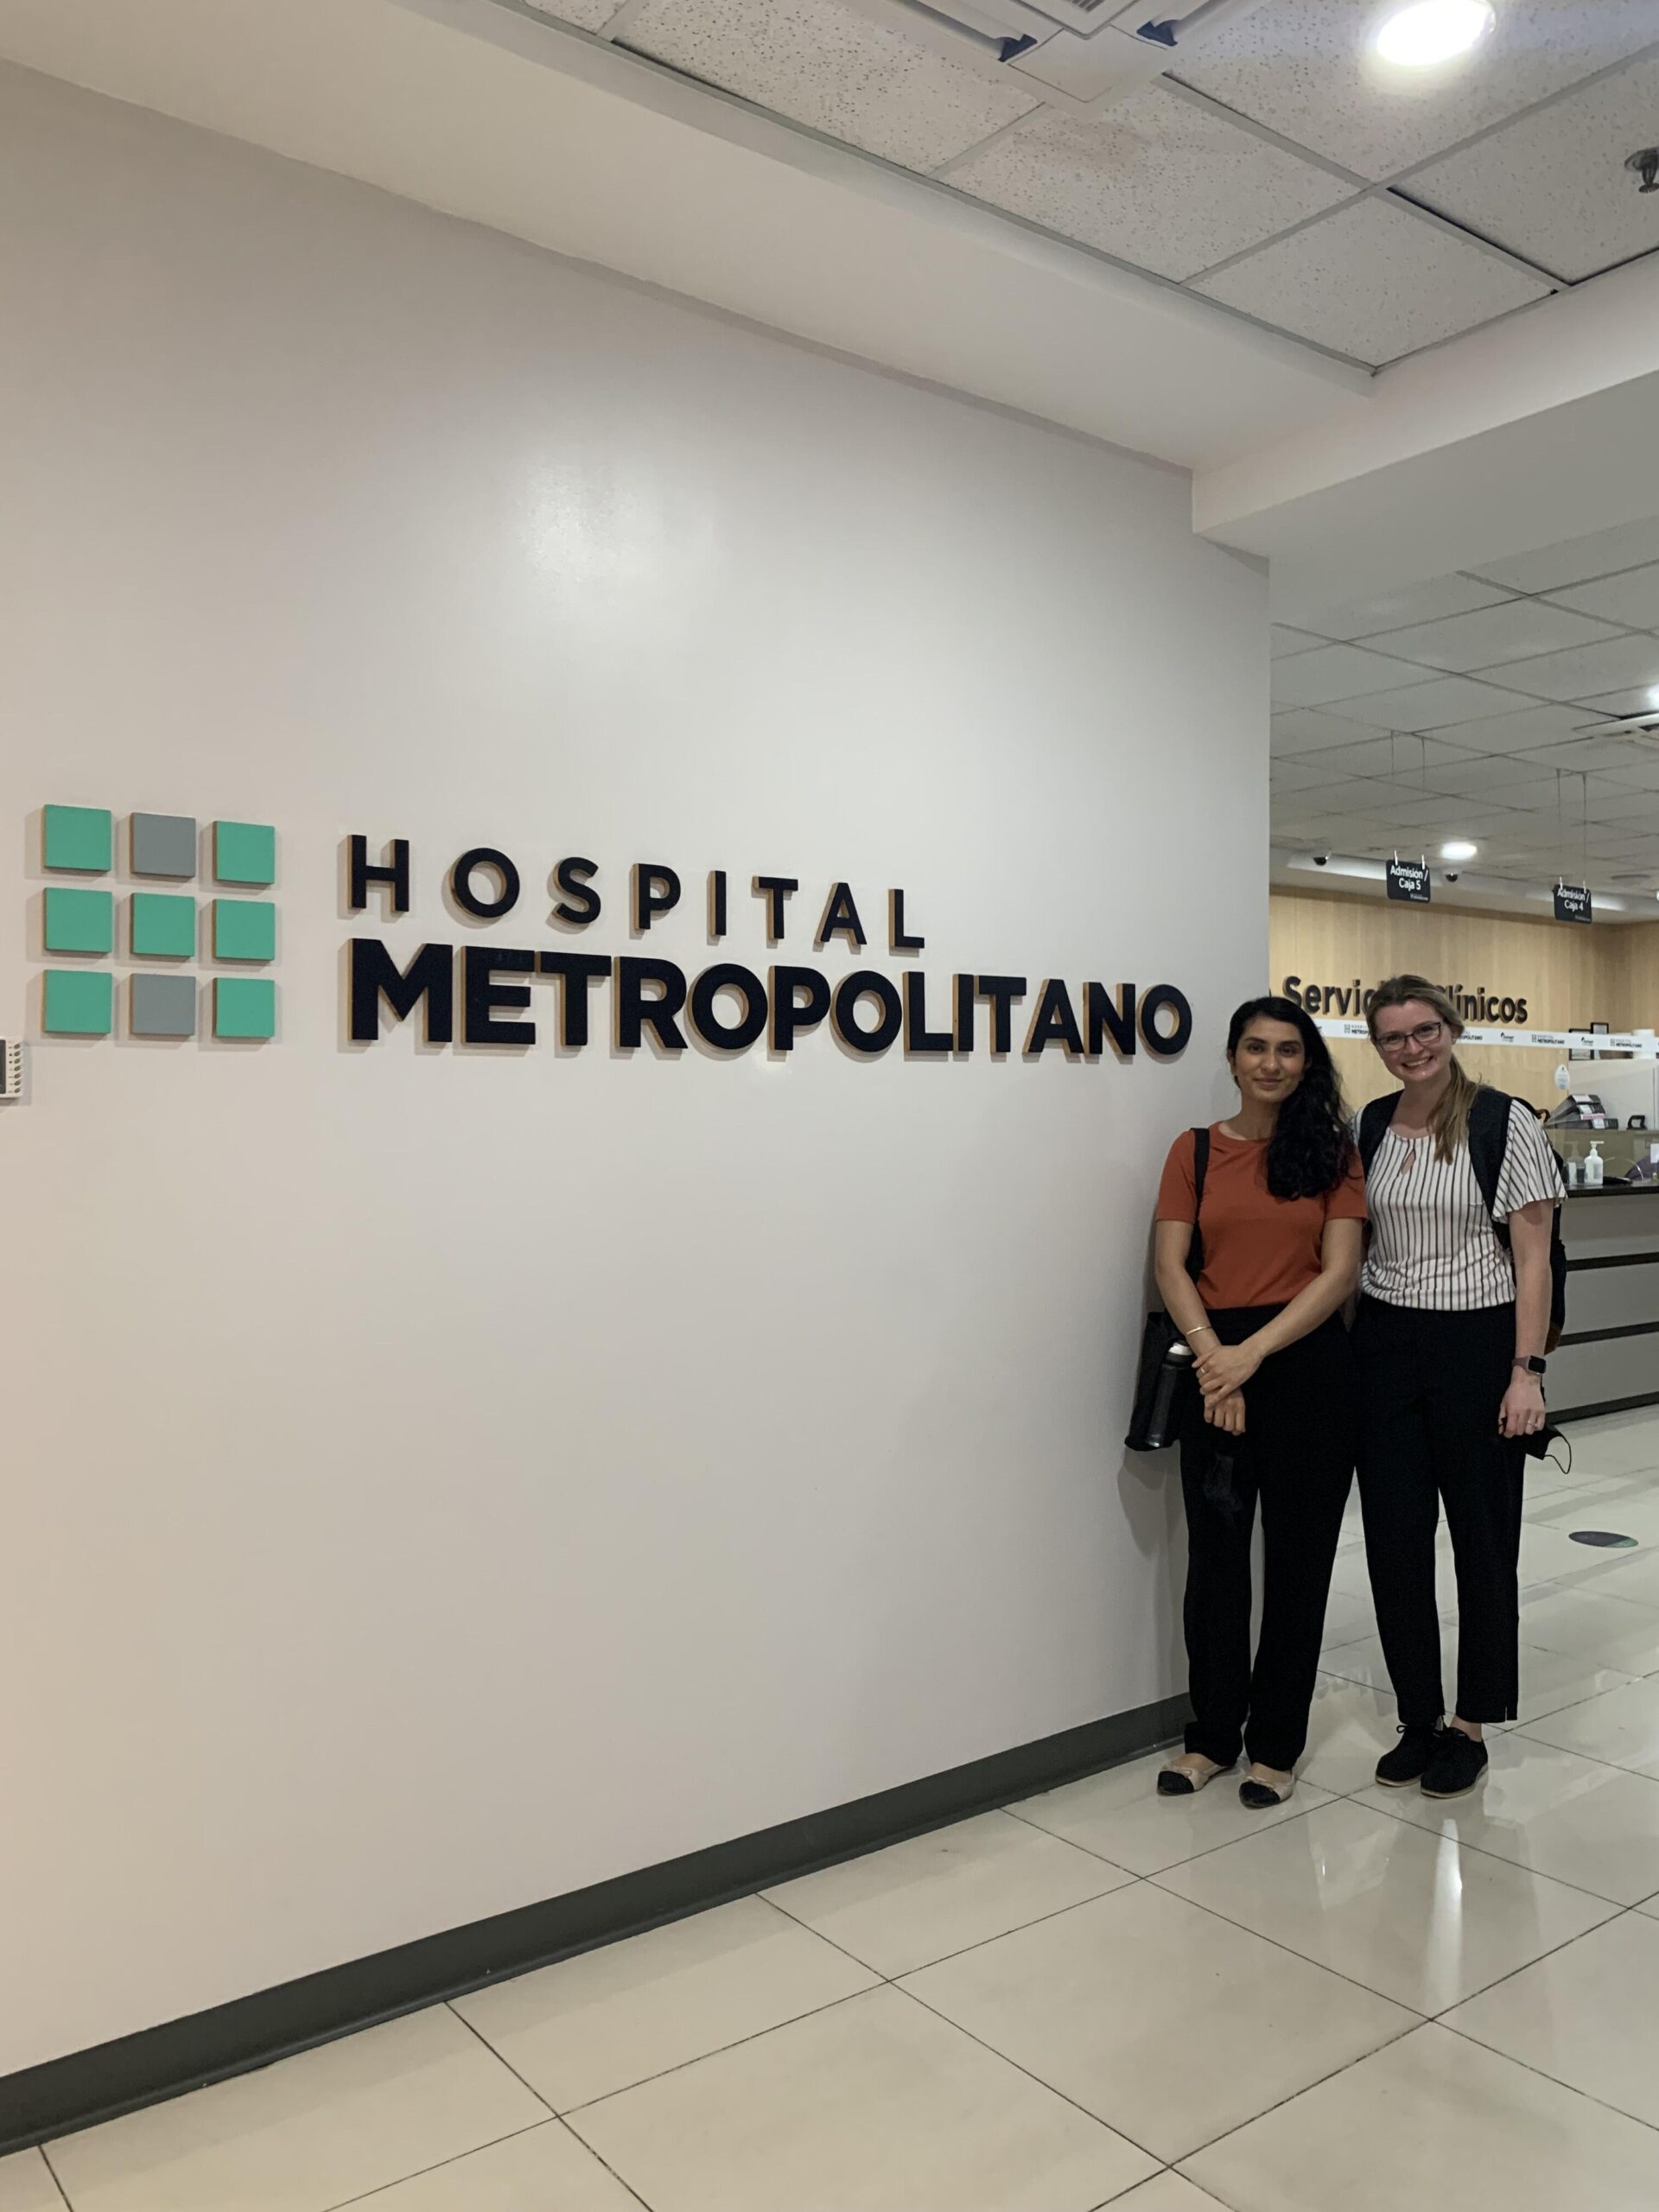 Two Sanford Health doctors stand next to an indoor sign for Hospital Metropolitano.